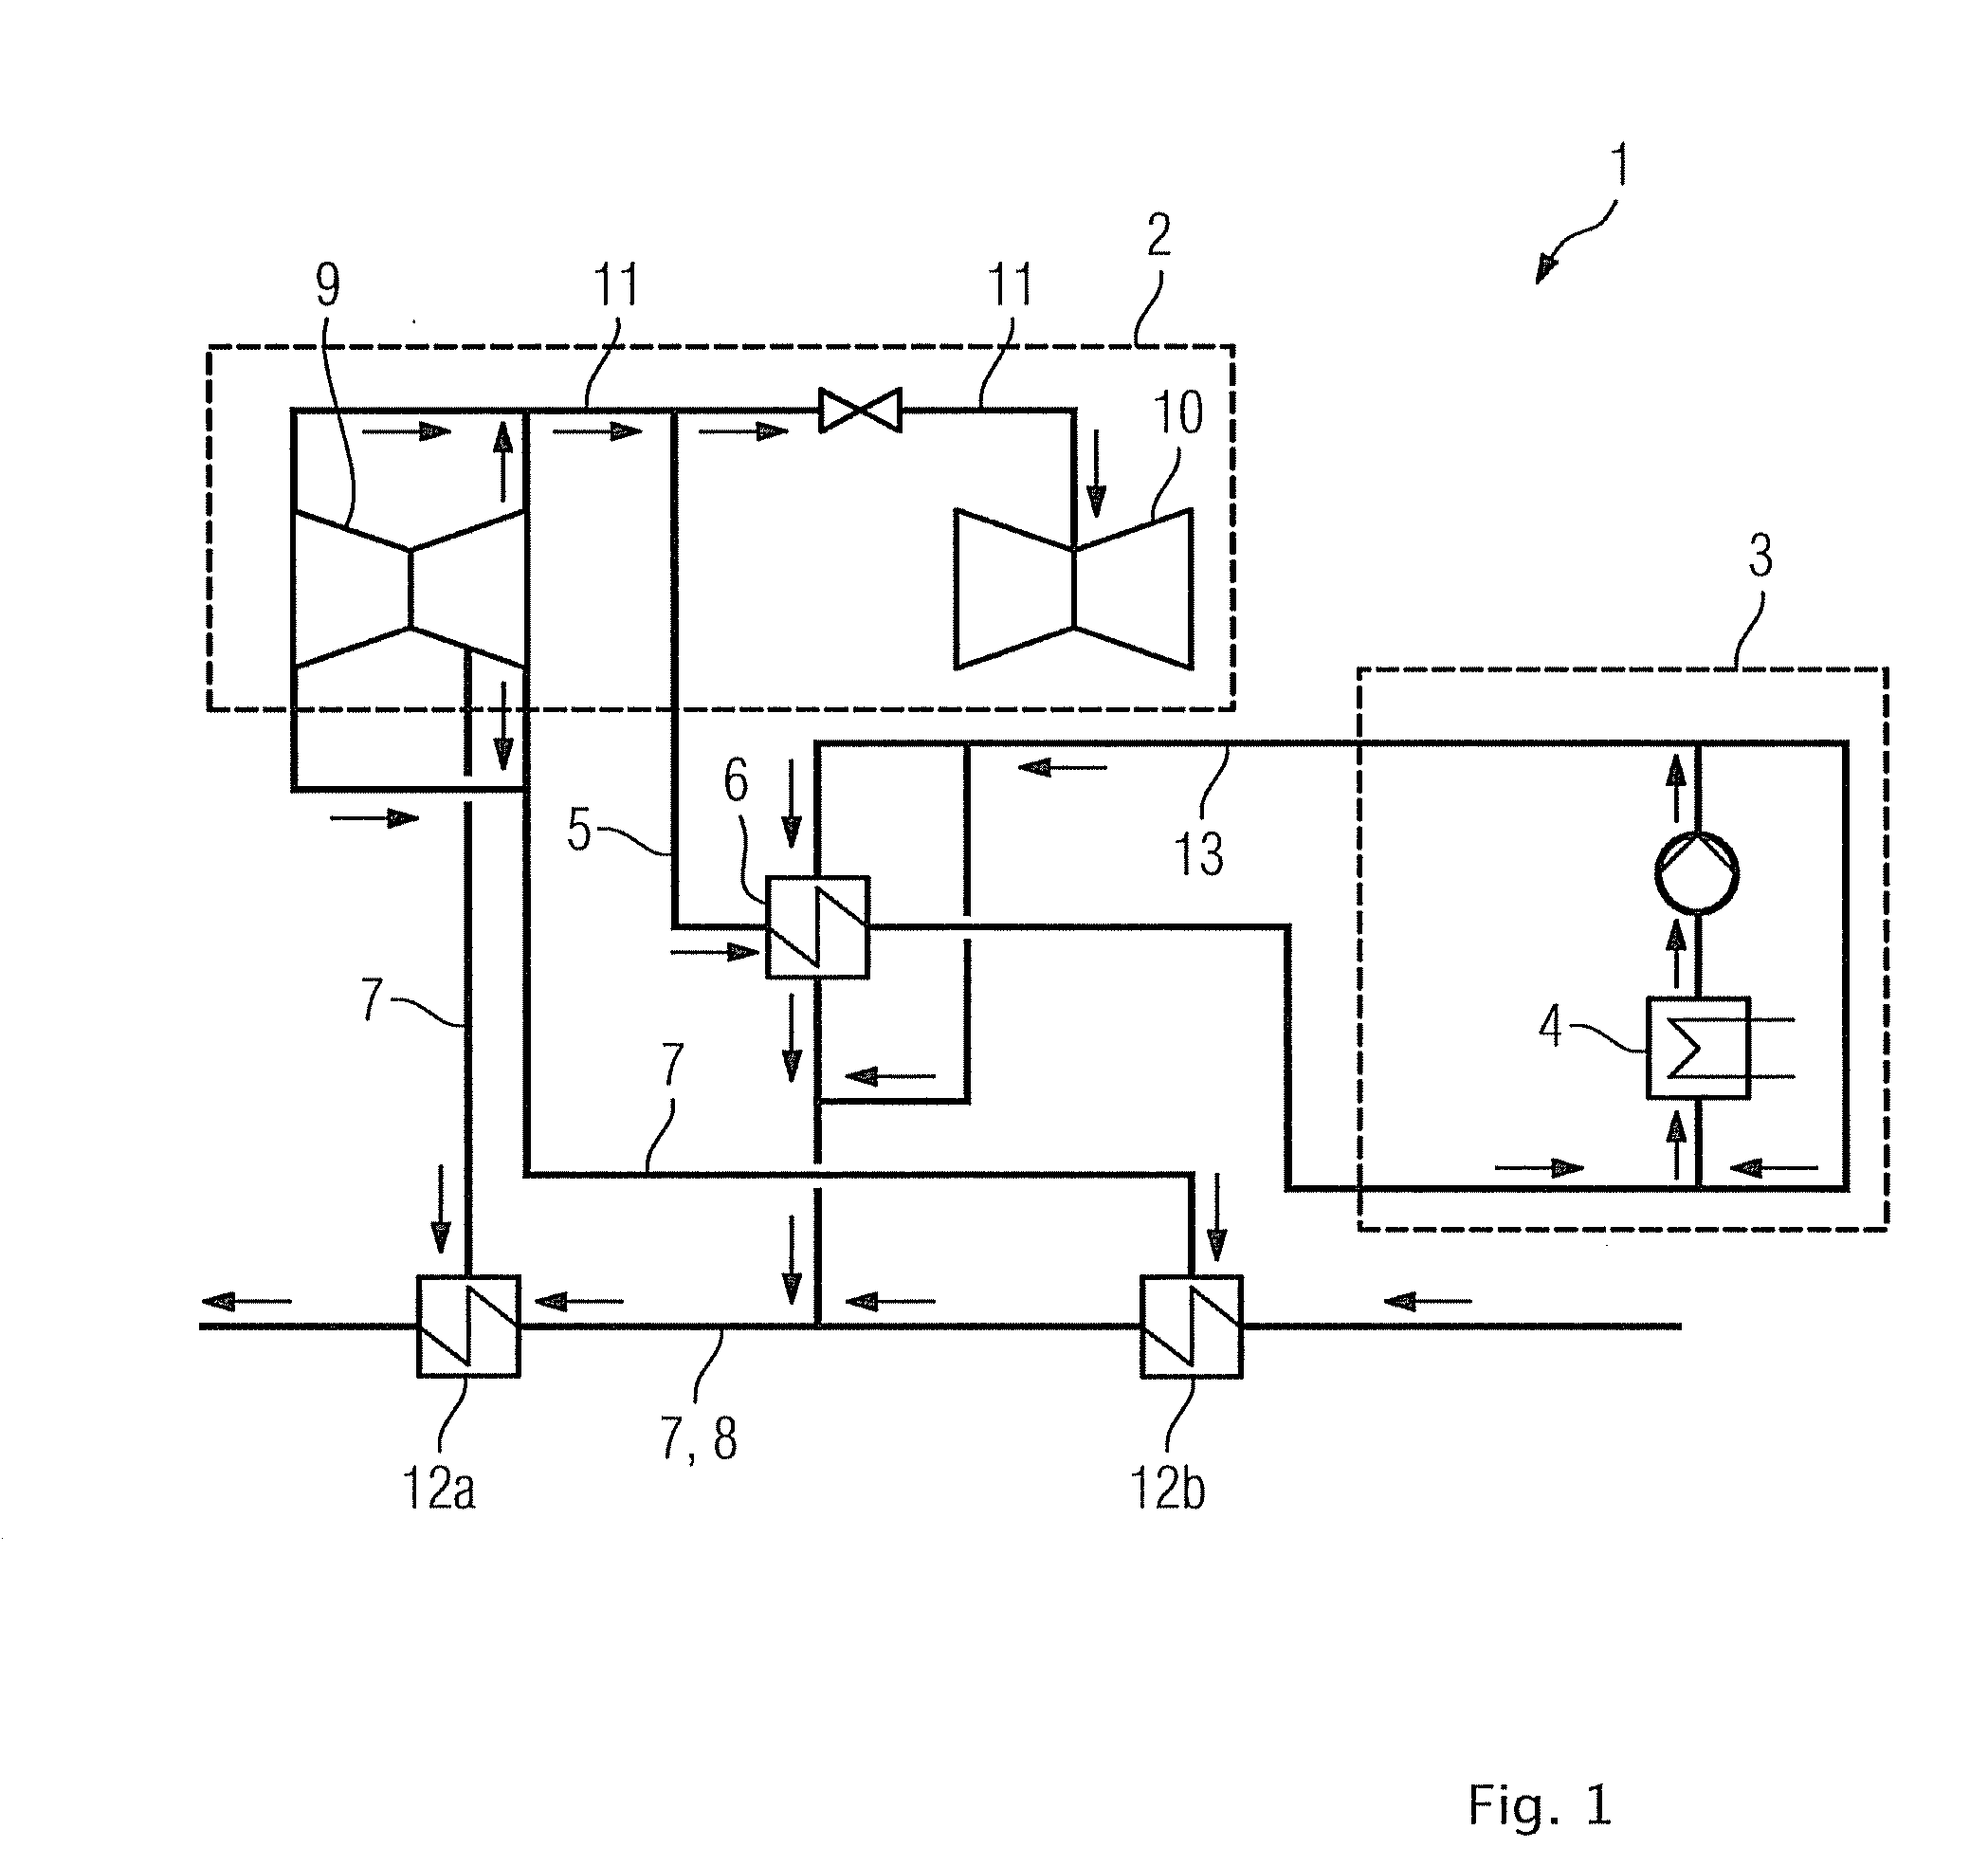 Steam power plant with steam turbine unit and process steam consumer, and method for operating a steam power plant with steam turbine unit and process steam consumer